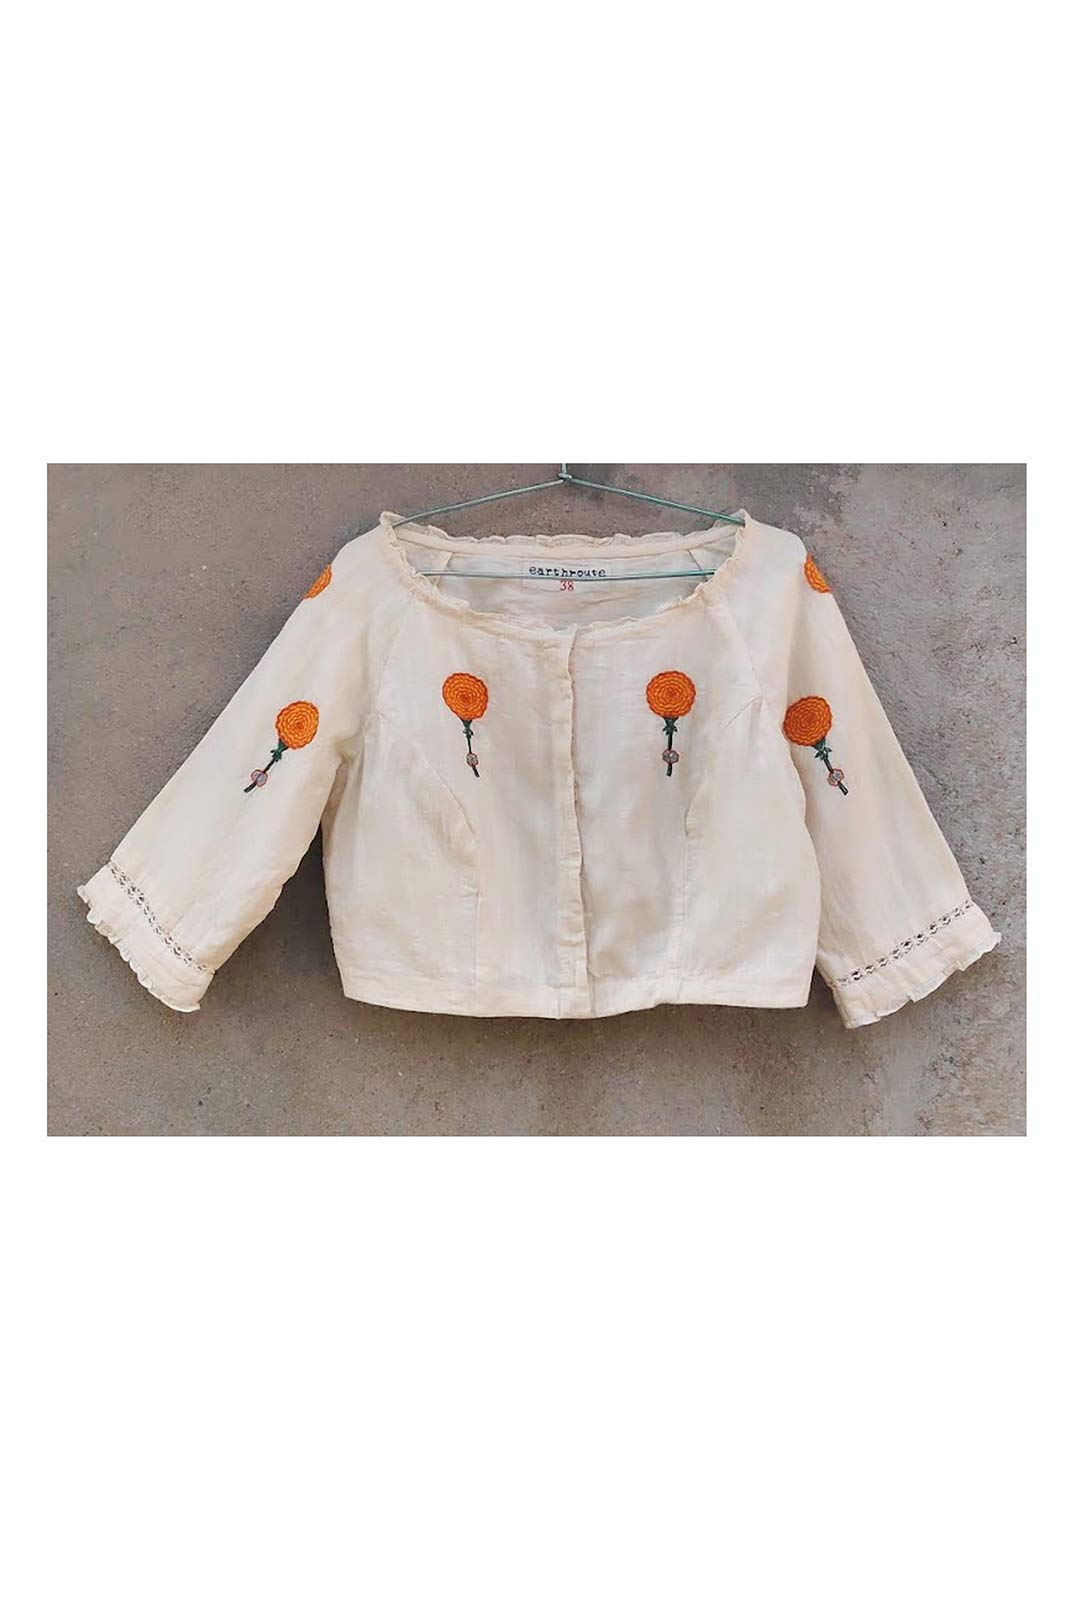 Marigold Hand Embroidered Saree Blouse, women saree blouse online, designer blouses online, shop blouse online, designer blouse, handmade blouse, weave blouse, cotton blouse, online blouse store, shop blouses online, Designer blouse brand